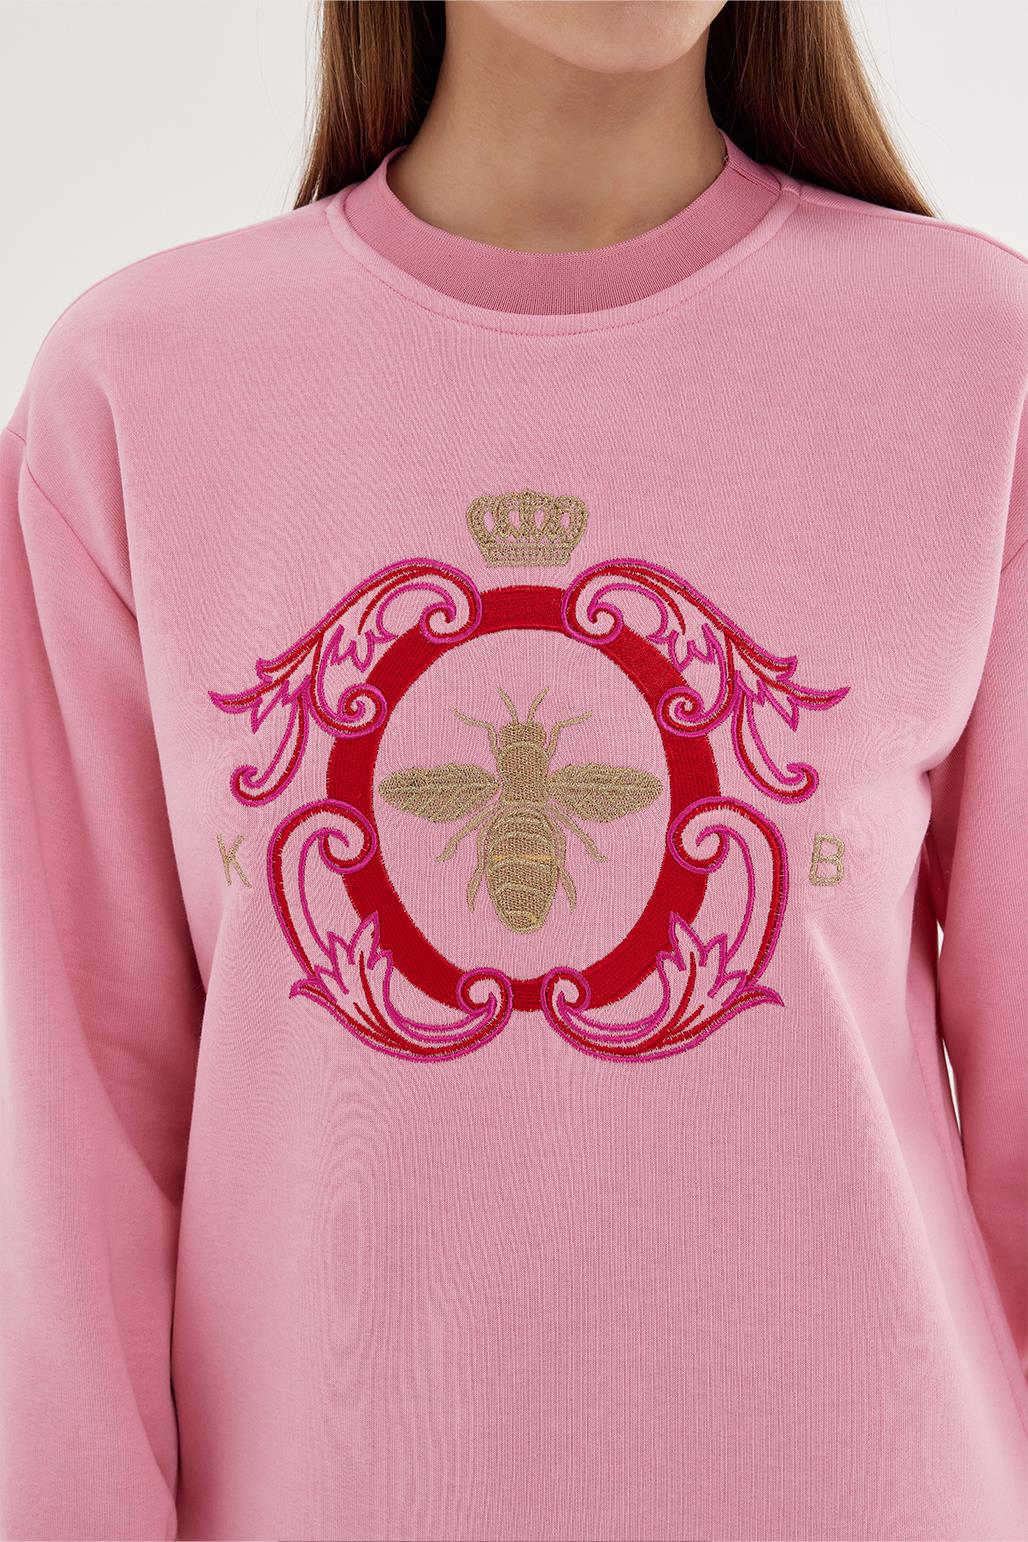 Gold Embroidered Hooded Sweatshirt Pink